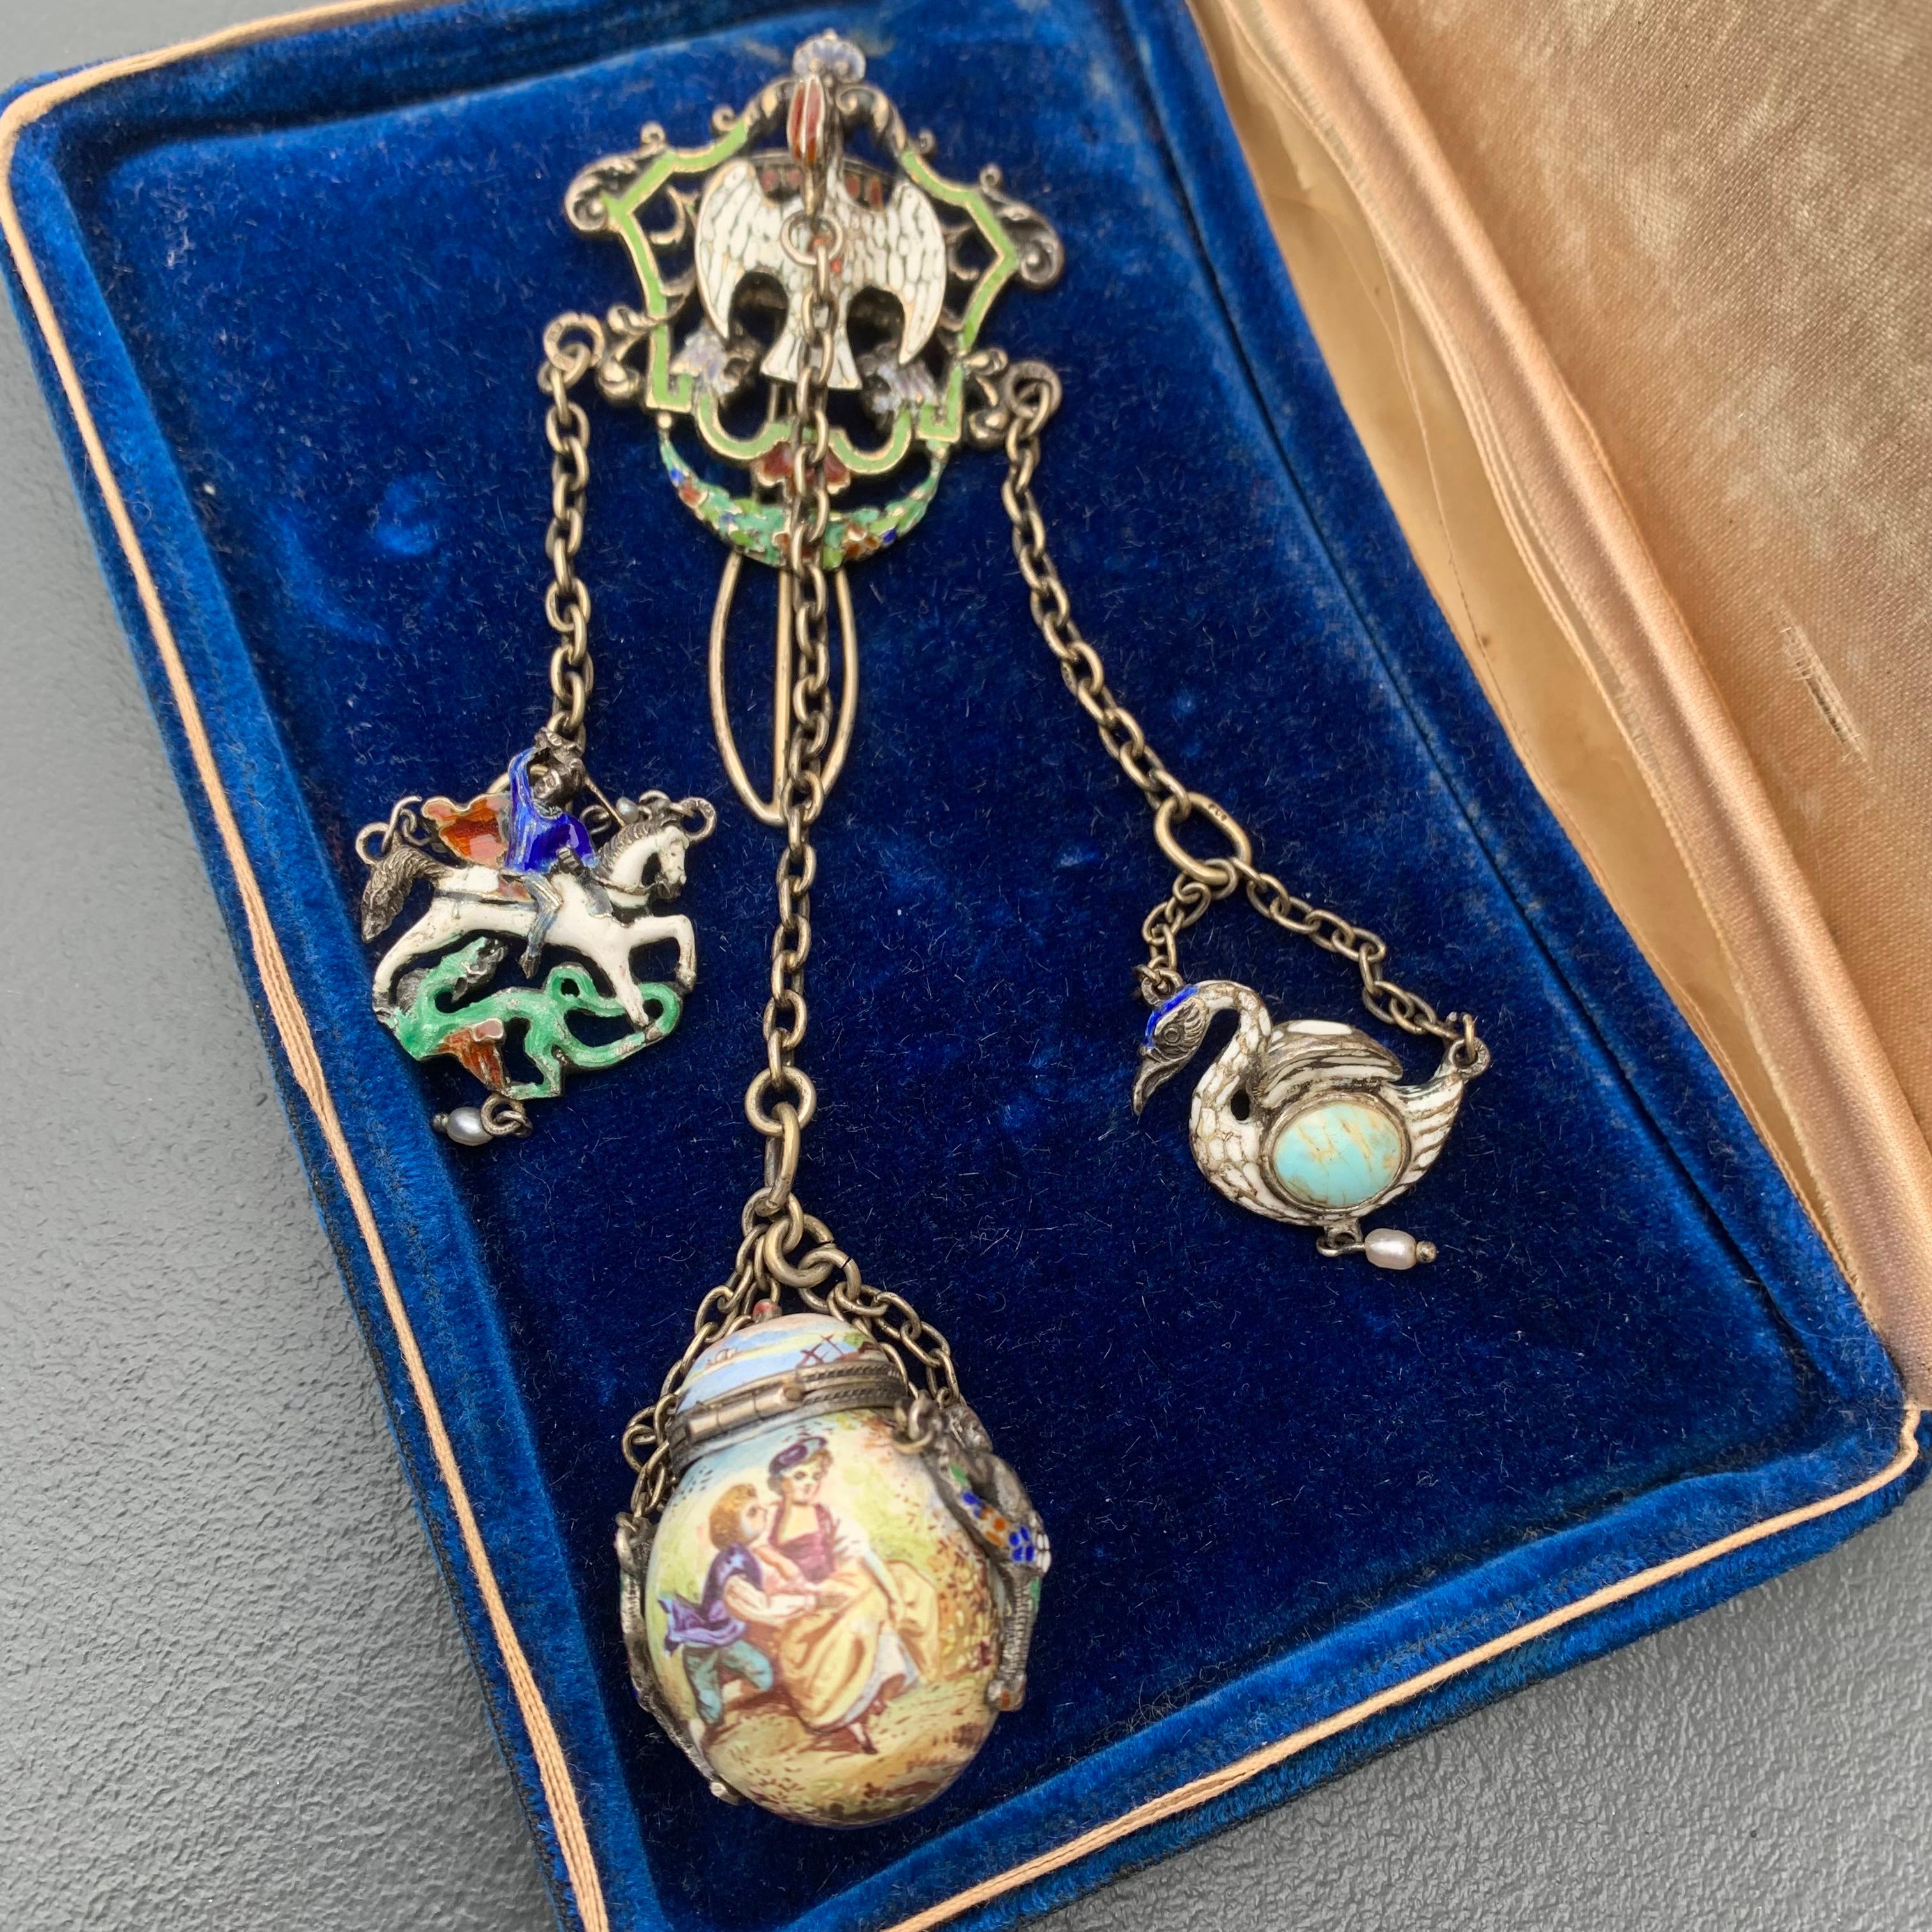 Absolutely Stunning details on this rare antique Renaissance Revival ,Austro Hungarian  gilt Silver and Enamel pomander Chatelaine pin . Beautifully hand painted with fine details .
Central Bottle pendant opens to reveal an hidden compartment which